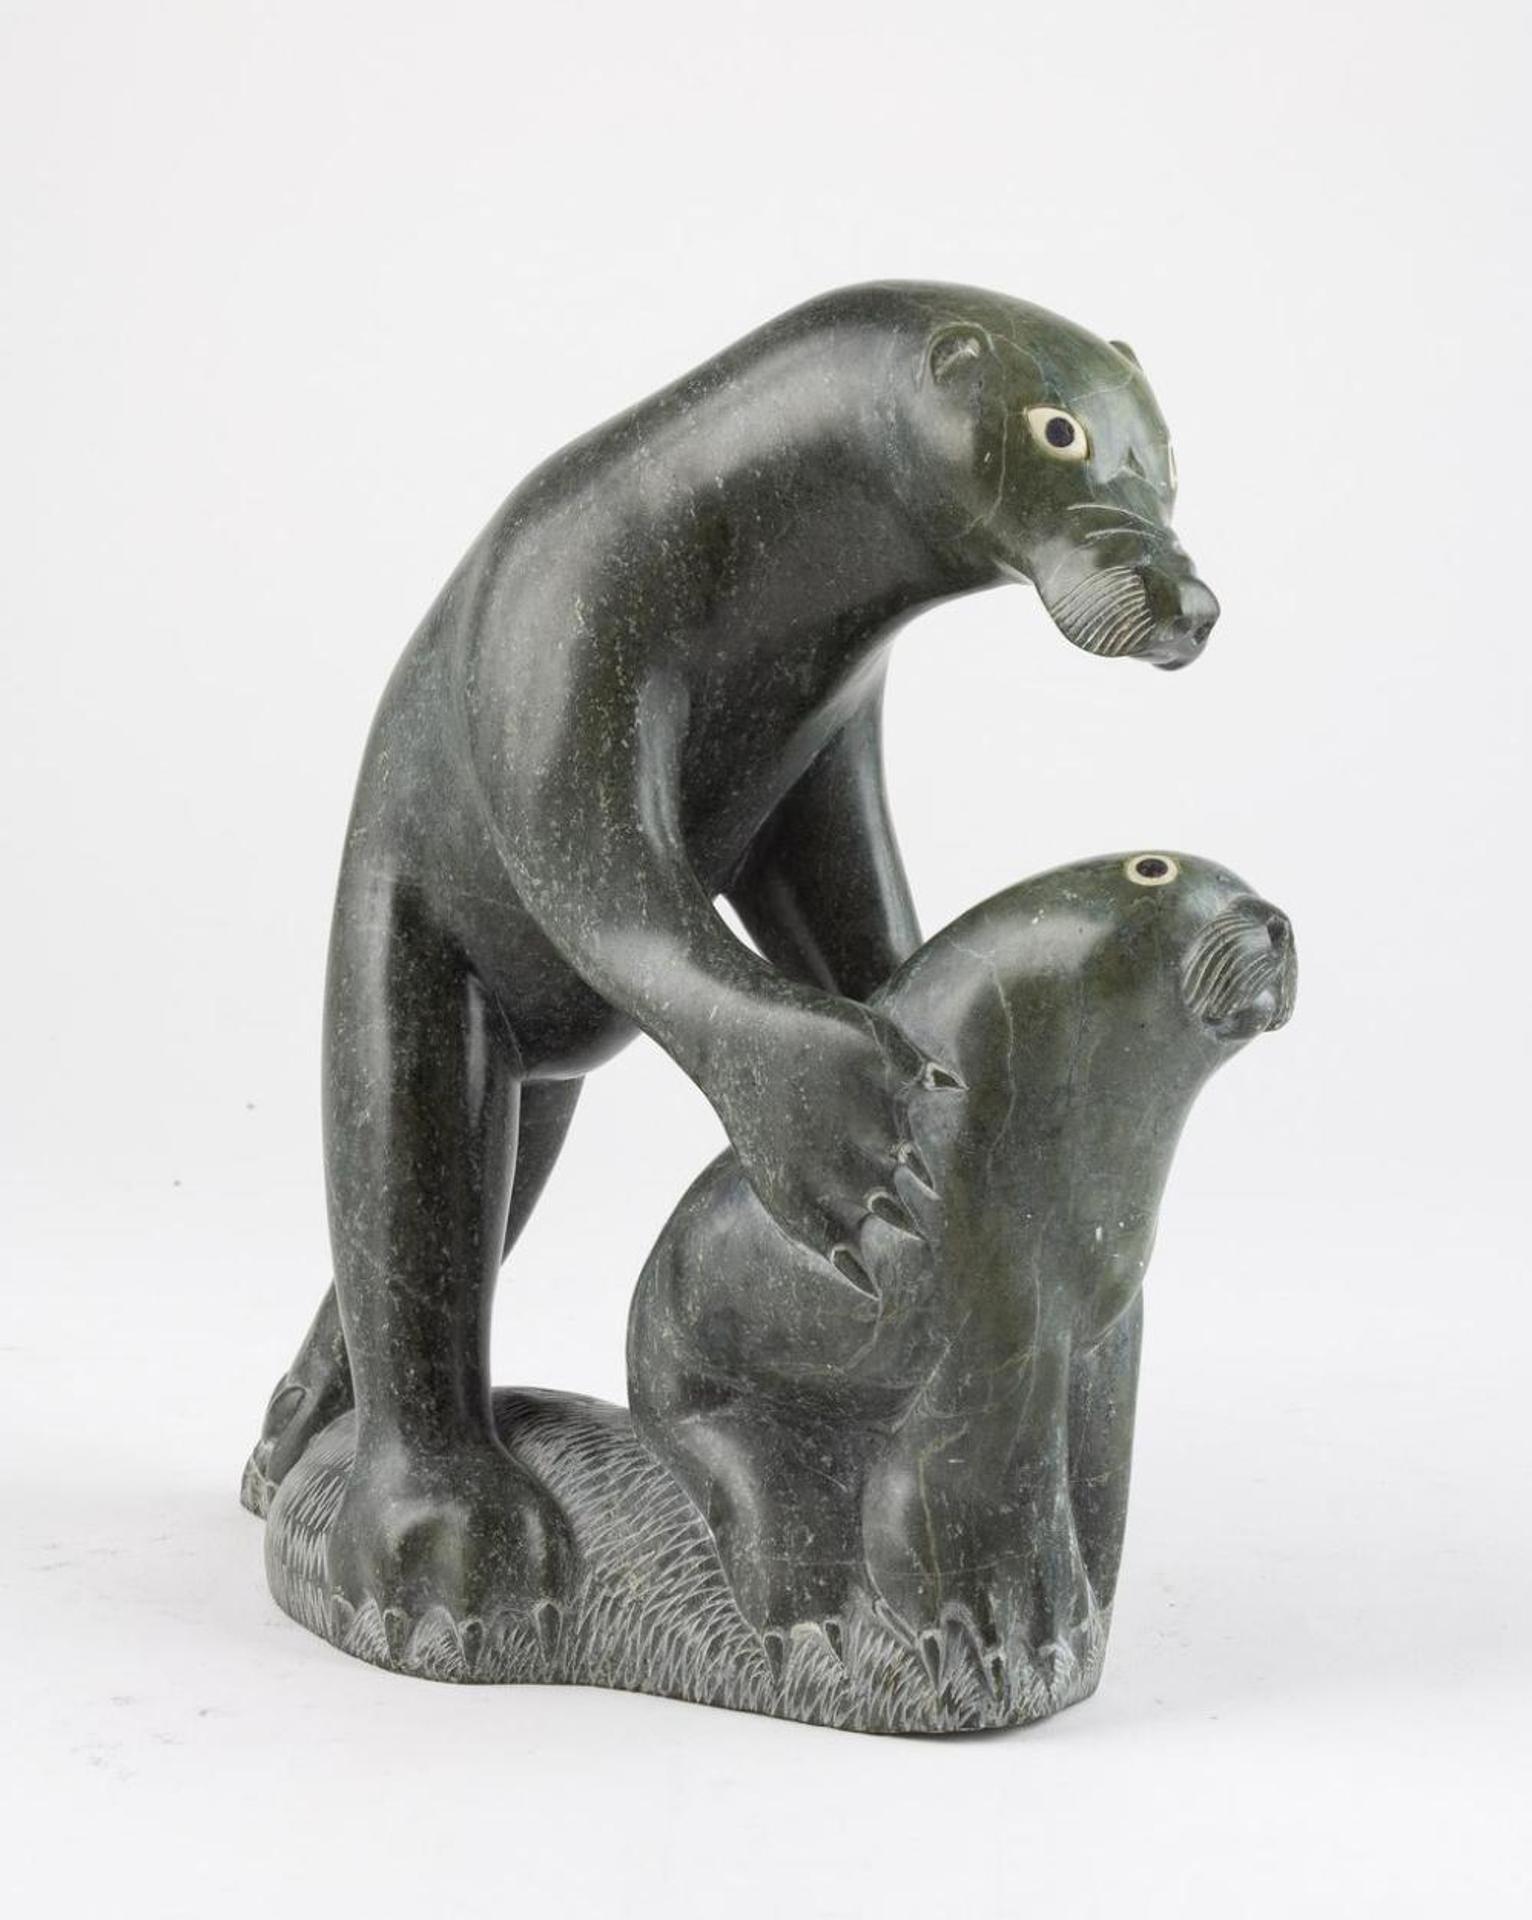 Simiuni - A green stone carving of a polar bear catching a seal